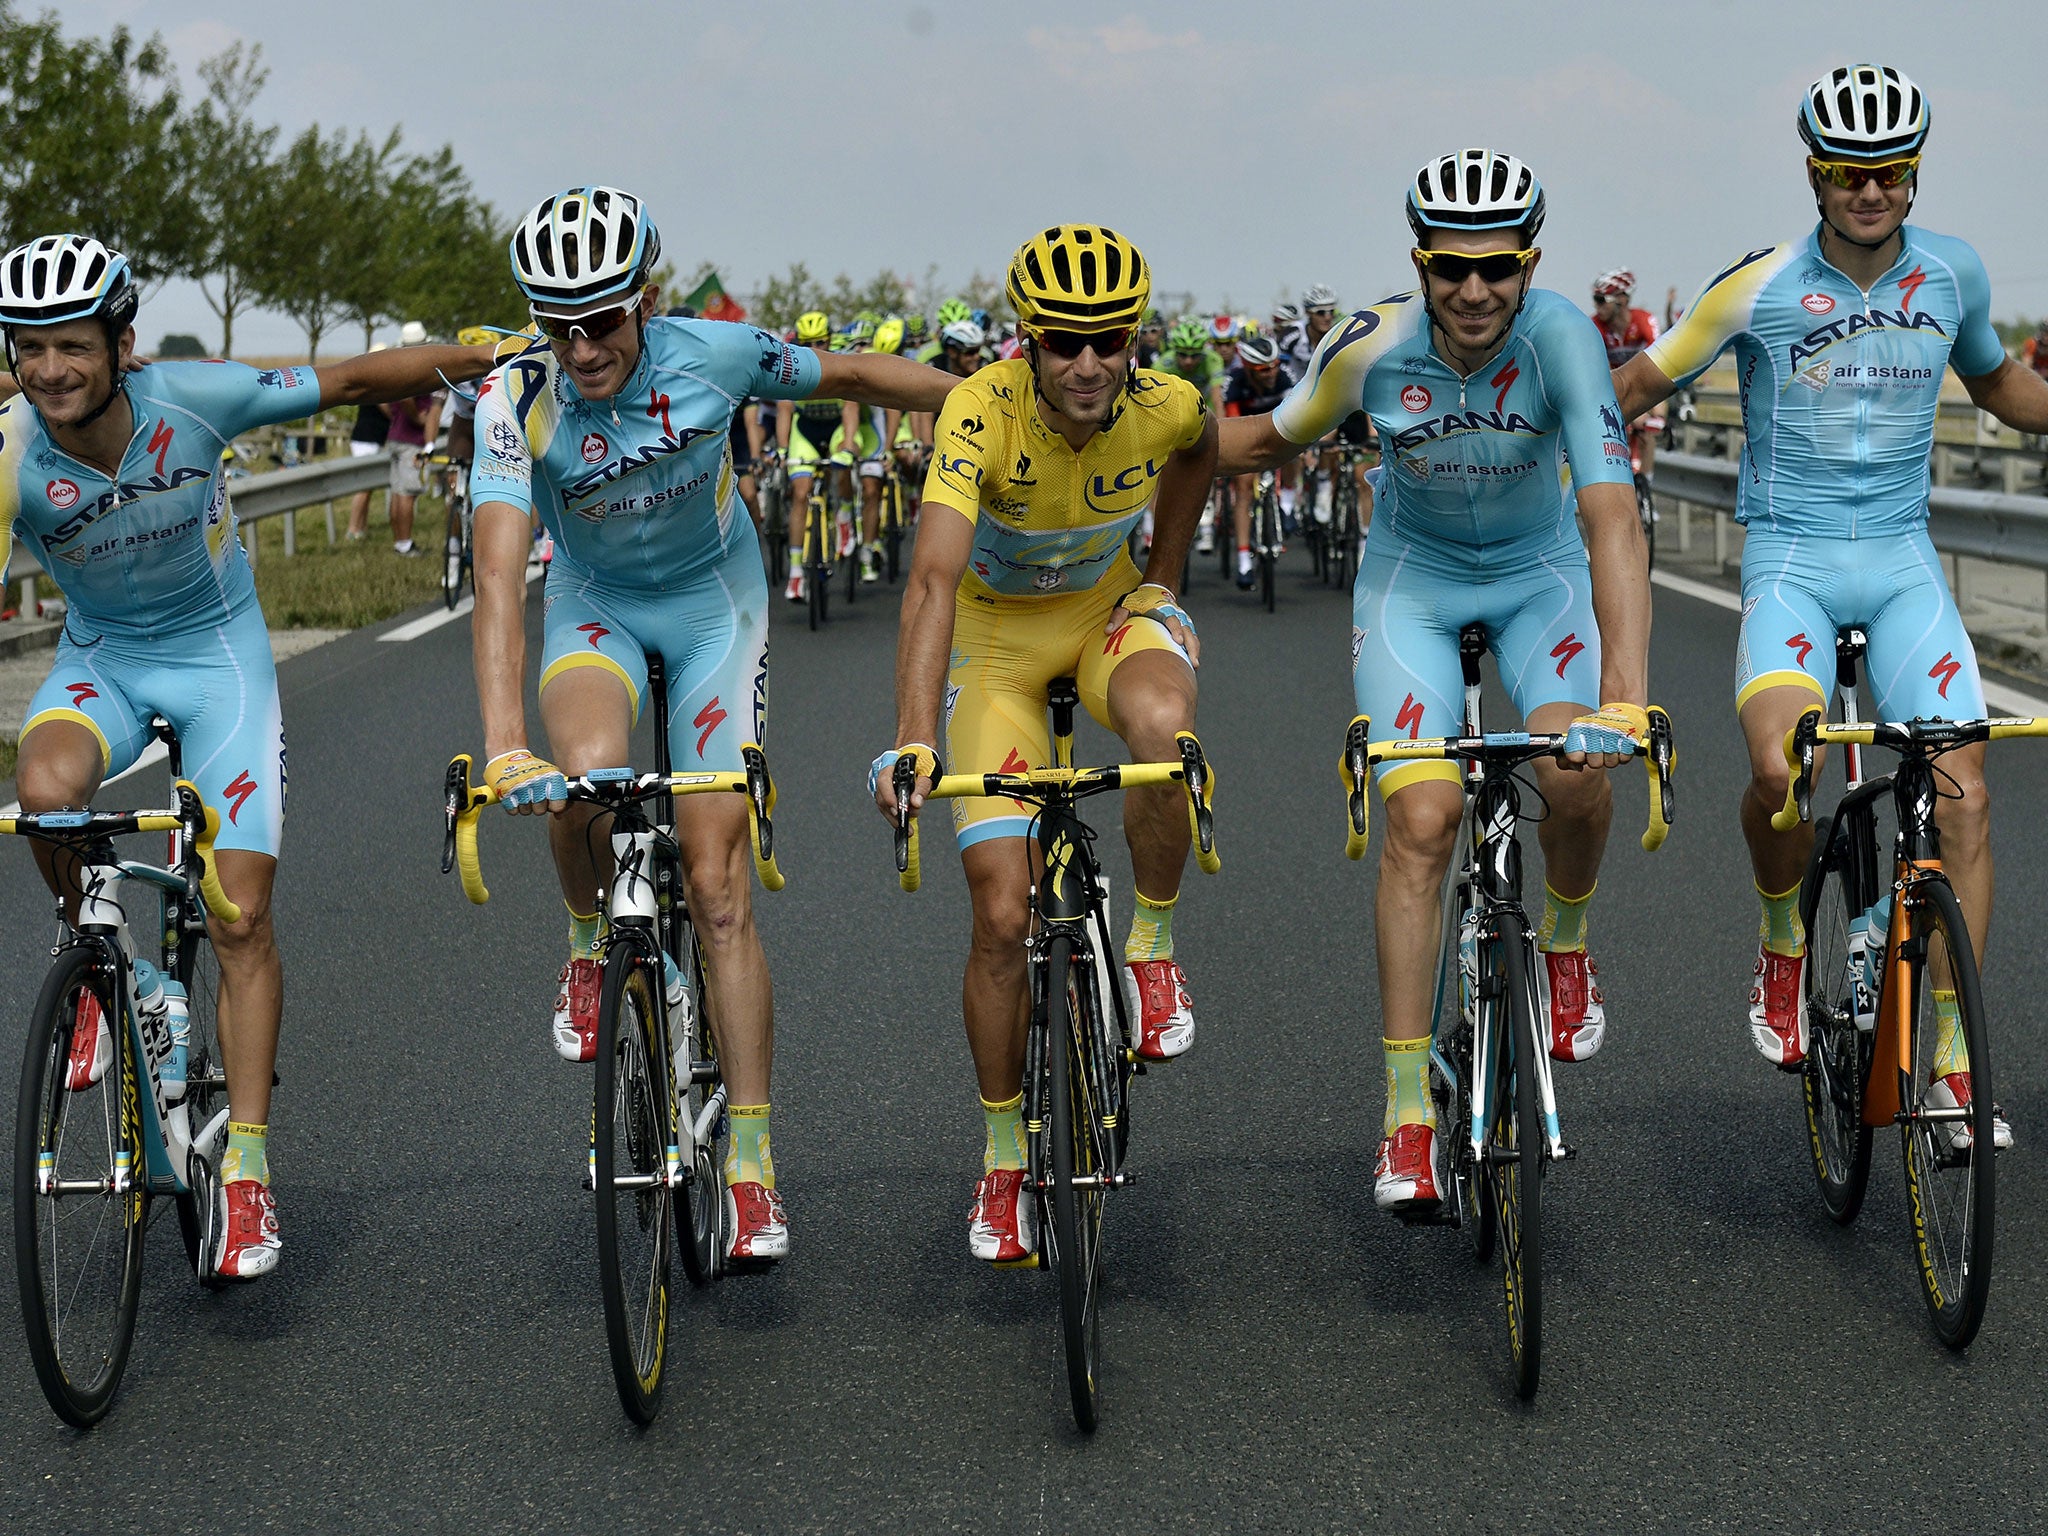 Vincenzo Nibali poses with his Astana team-mates on the final stage of the Tour de France